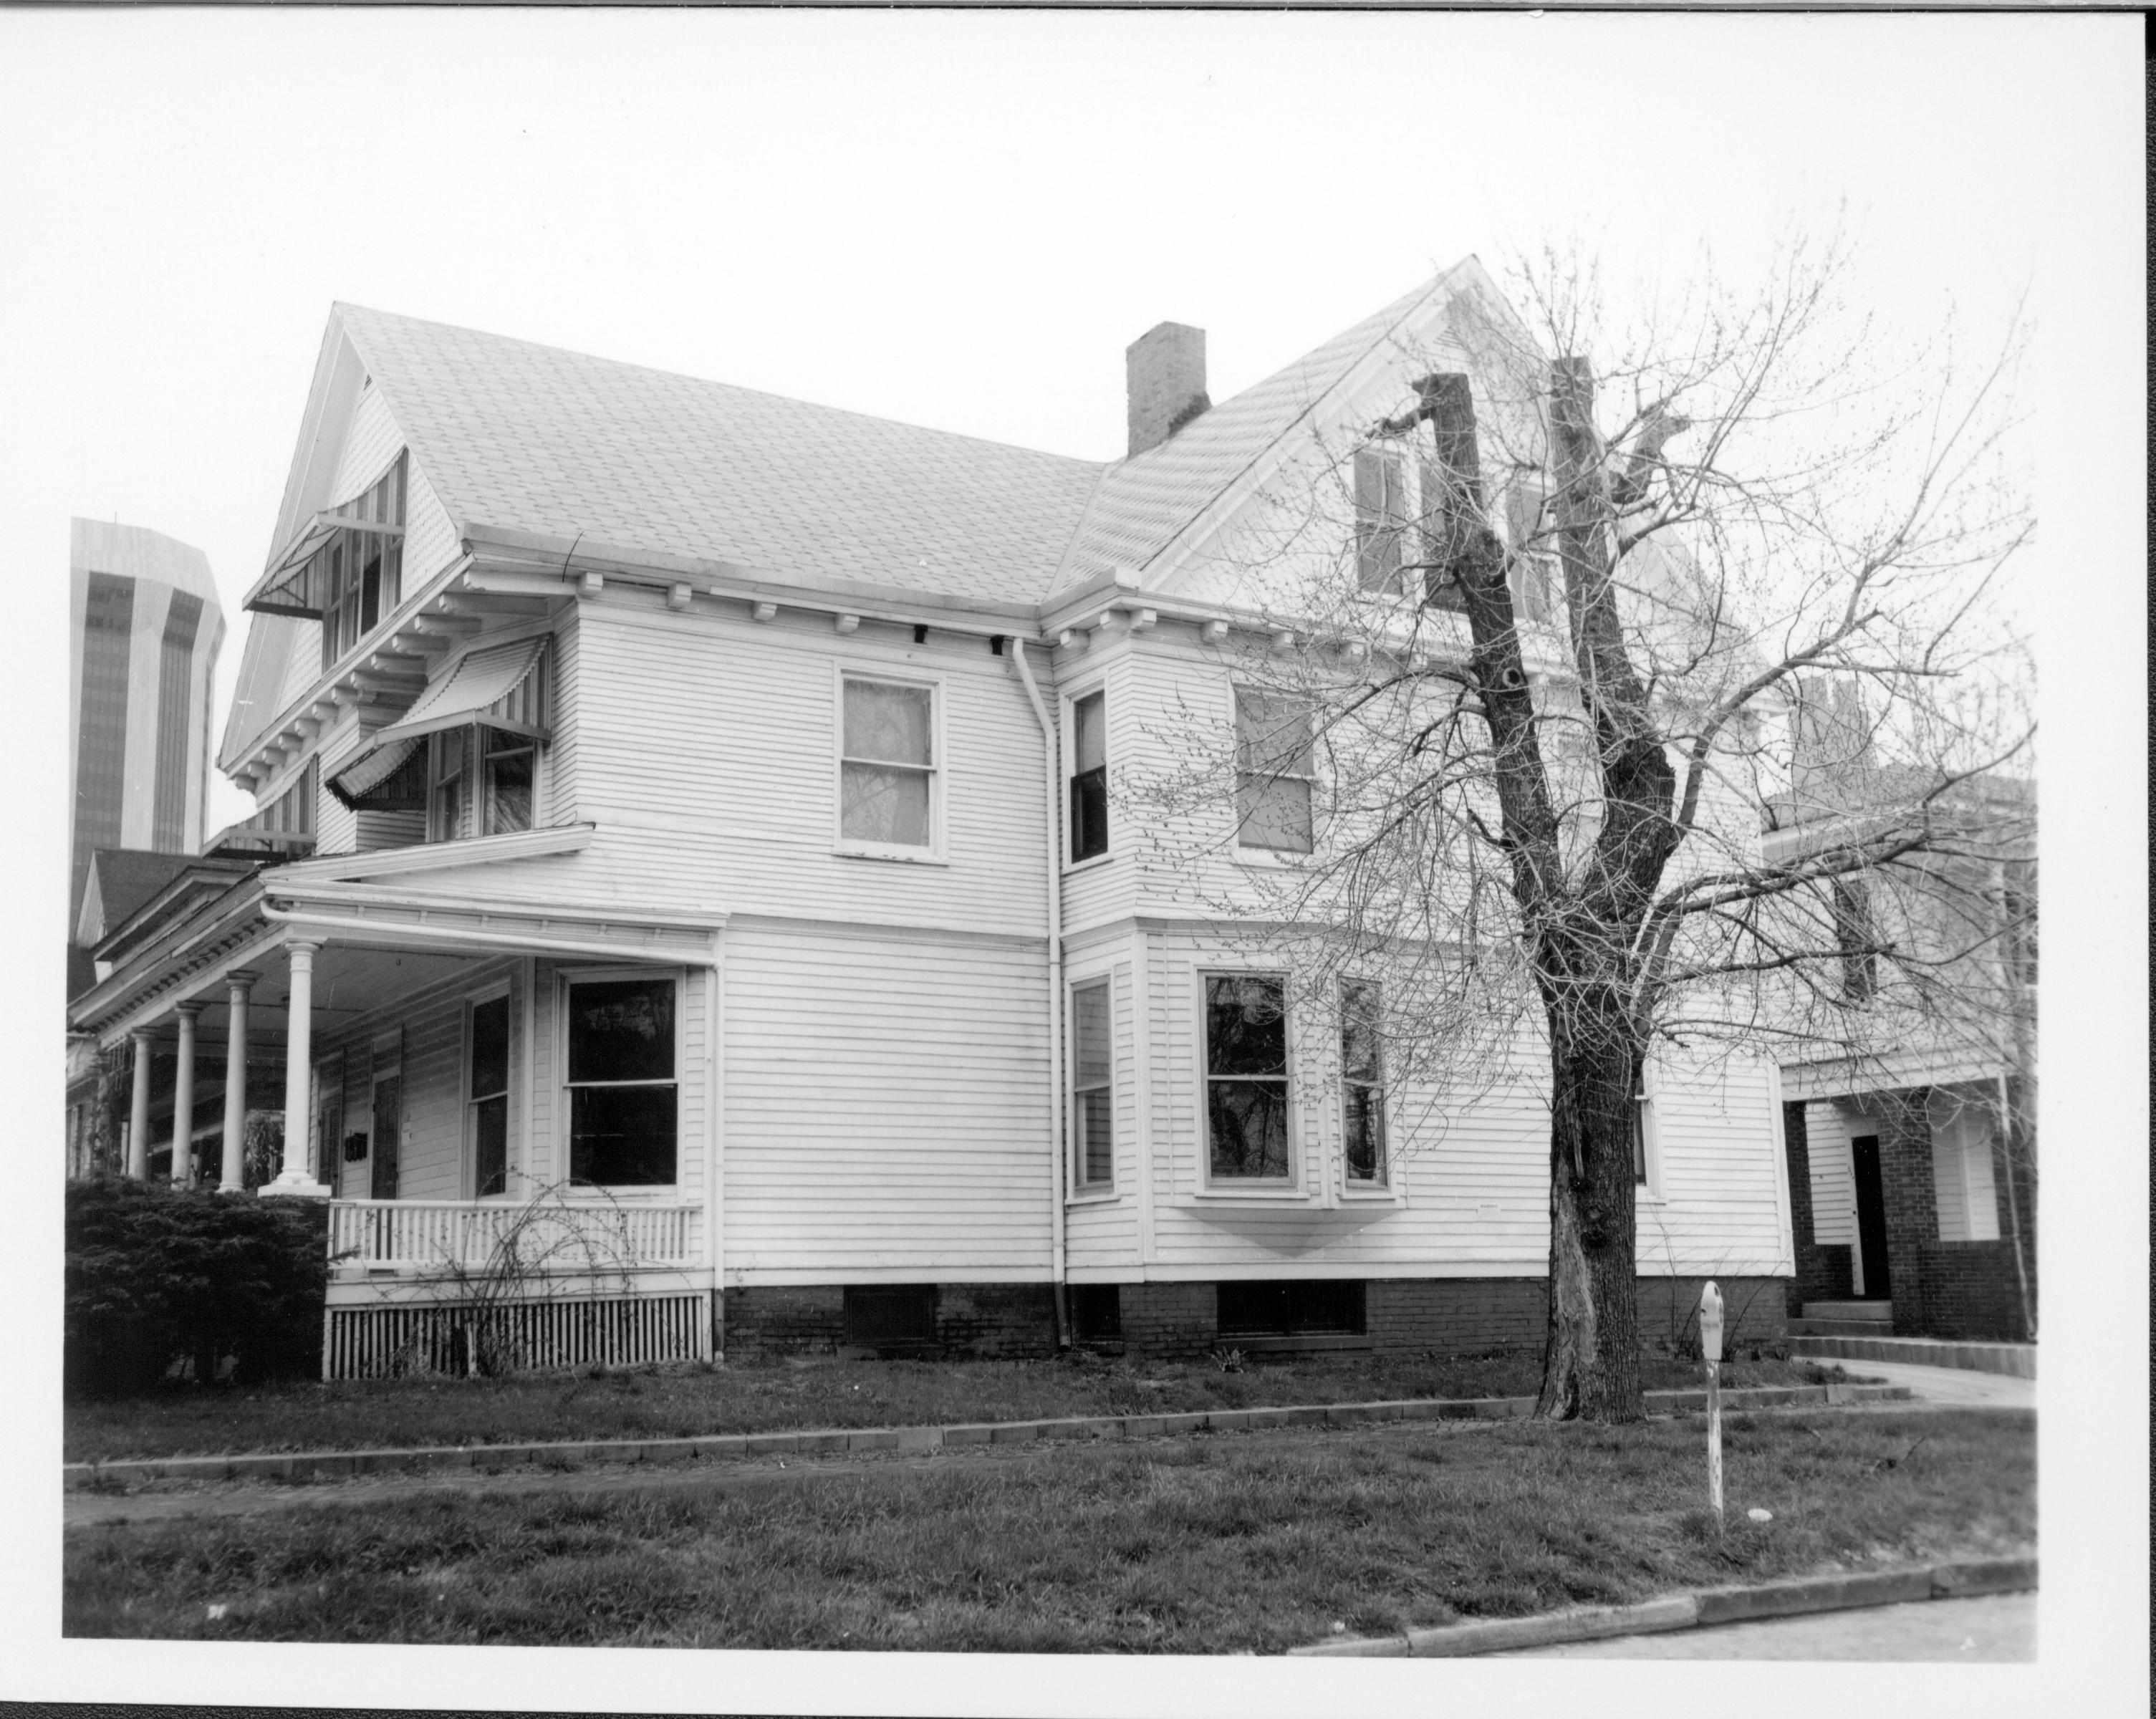 Home owned by William Hermes in use as apartments, South elevation along Jackson Street, Block 7, Lot 8.  Hilton hotel tower on left, home owned by William T. Sheeham on right. Visitor Center in location now.  Looking Northeast along Jackson Street Hermes, Sheeham, Hilton Hotel, Jackson Street, Visitor Center